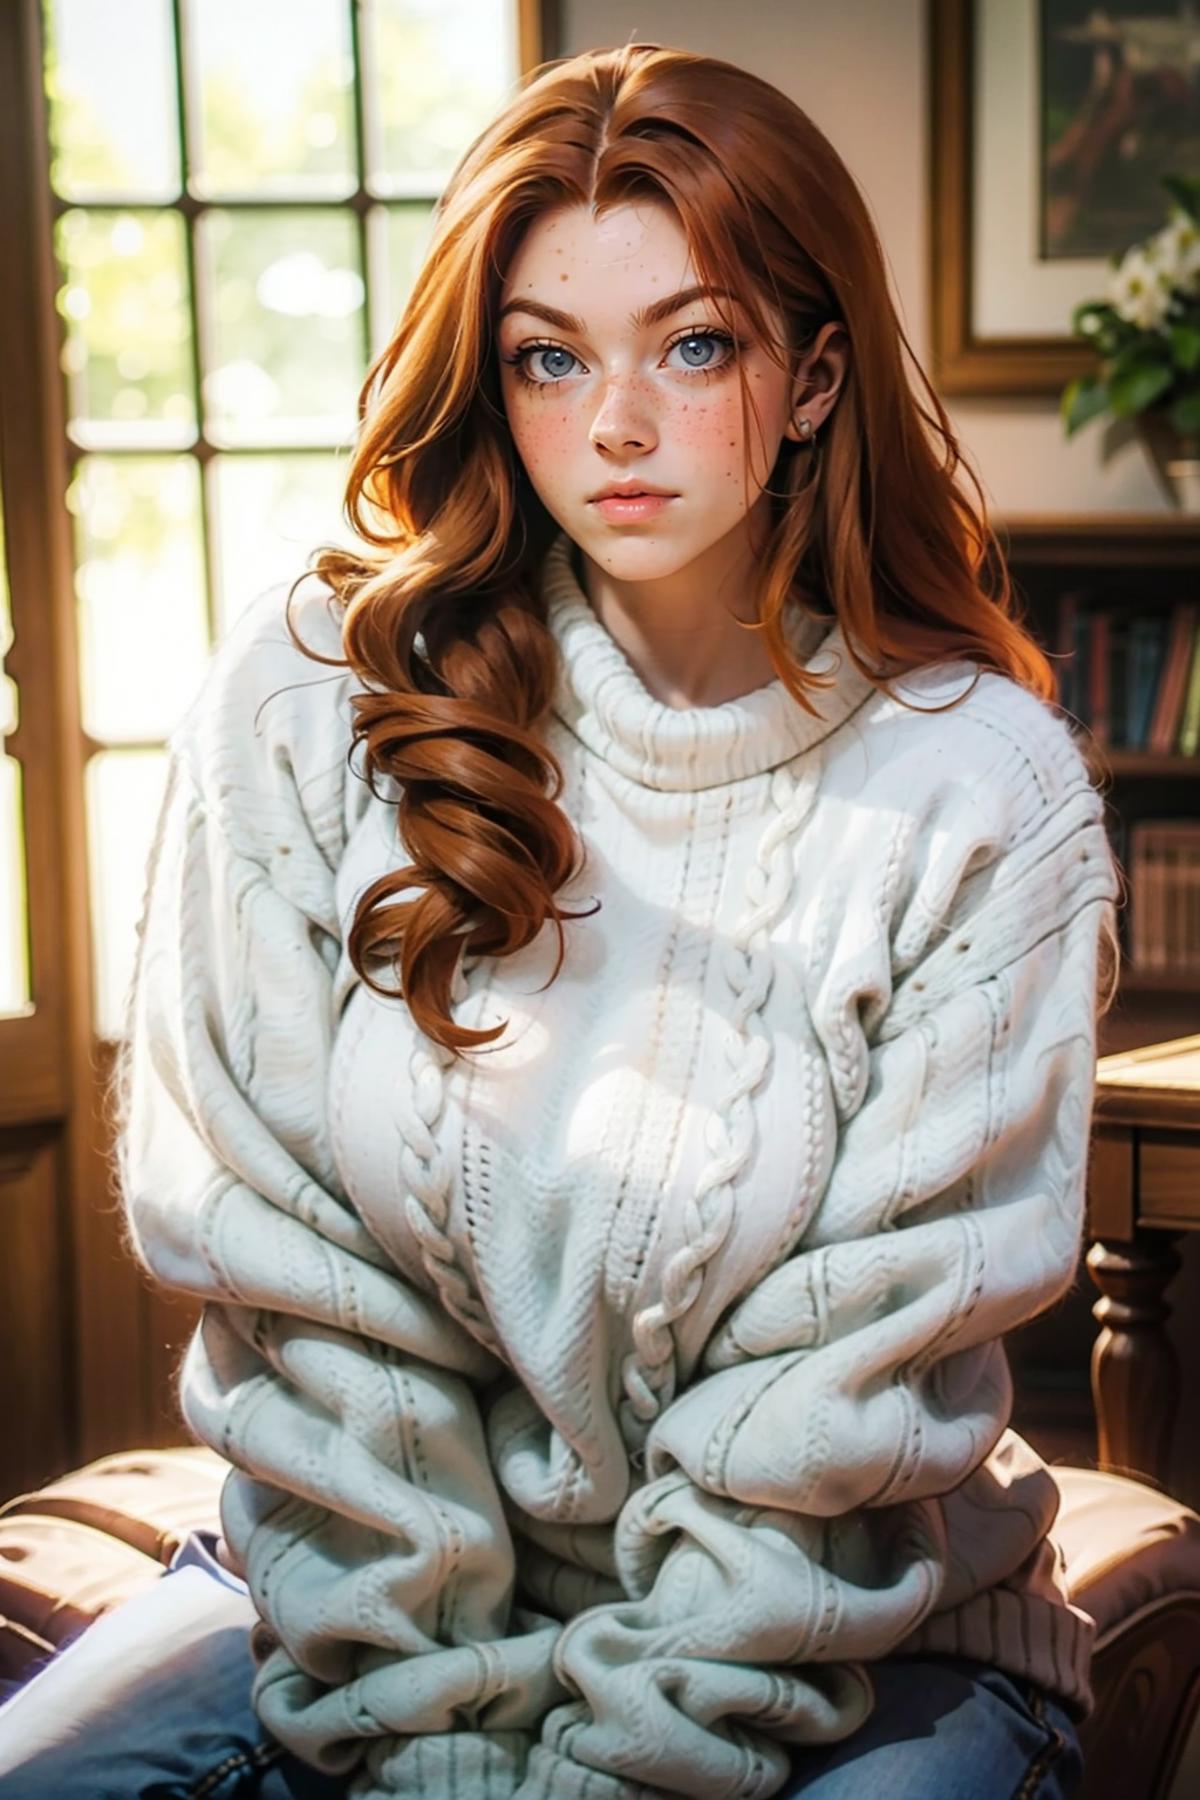 A woman with red hair and blue eyes wearing a white sweater and posing for a portrait.